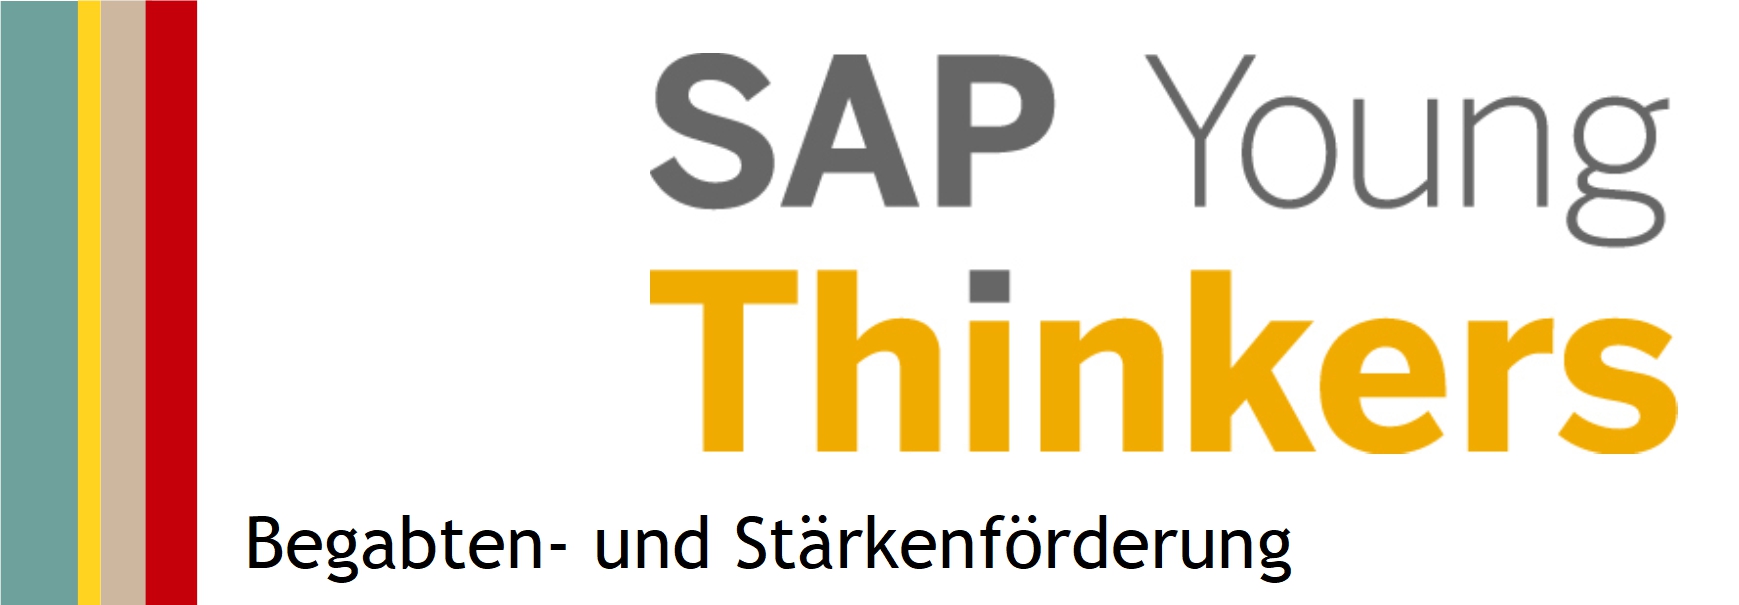 SAP Young Thinkers Logo